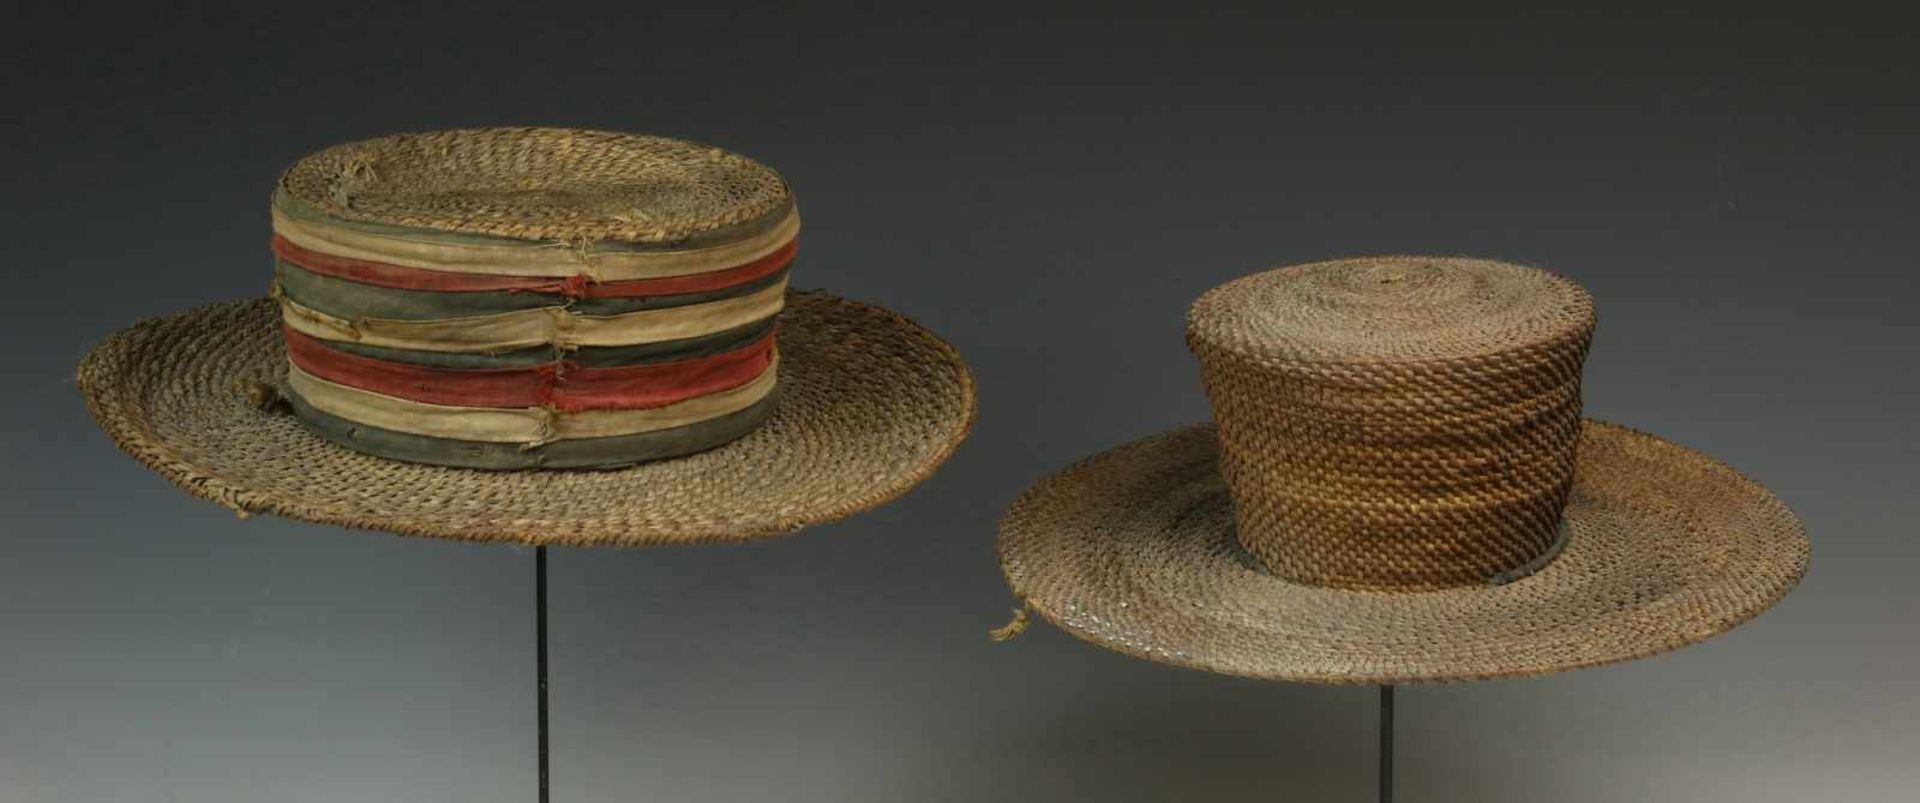 DRC., two braided plantfiber hatsone with colored cotton bands and both with a wooden support - Bild 2 aus 2